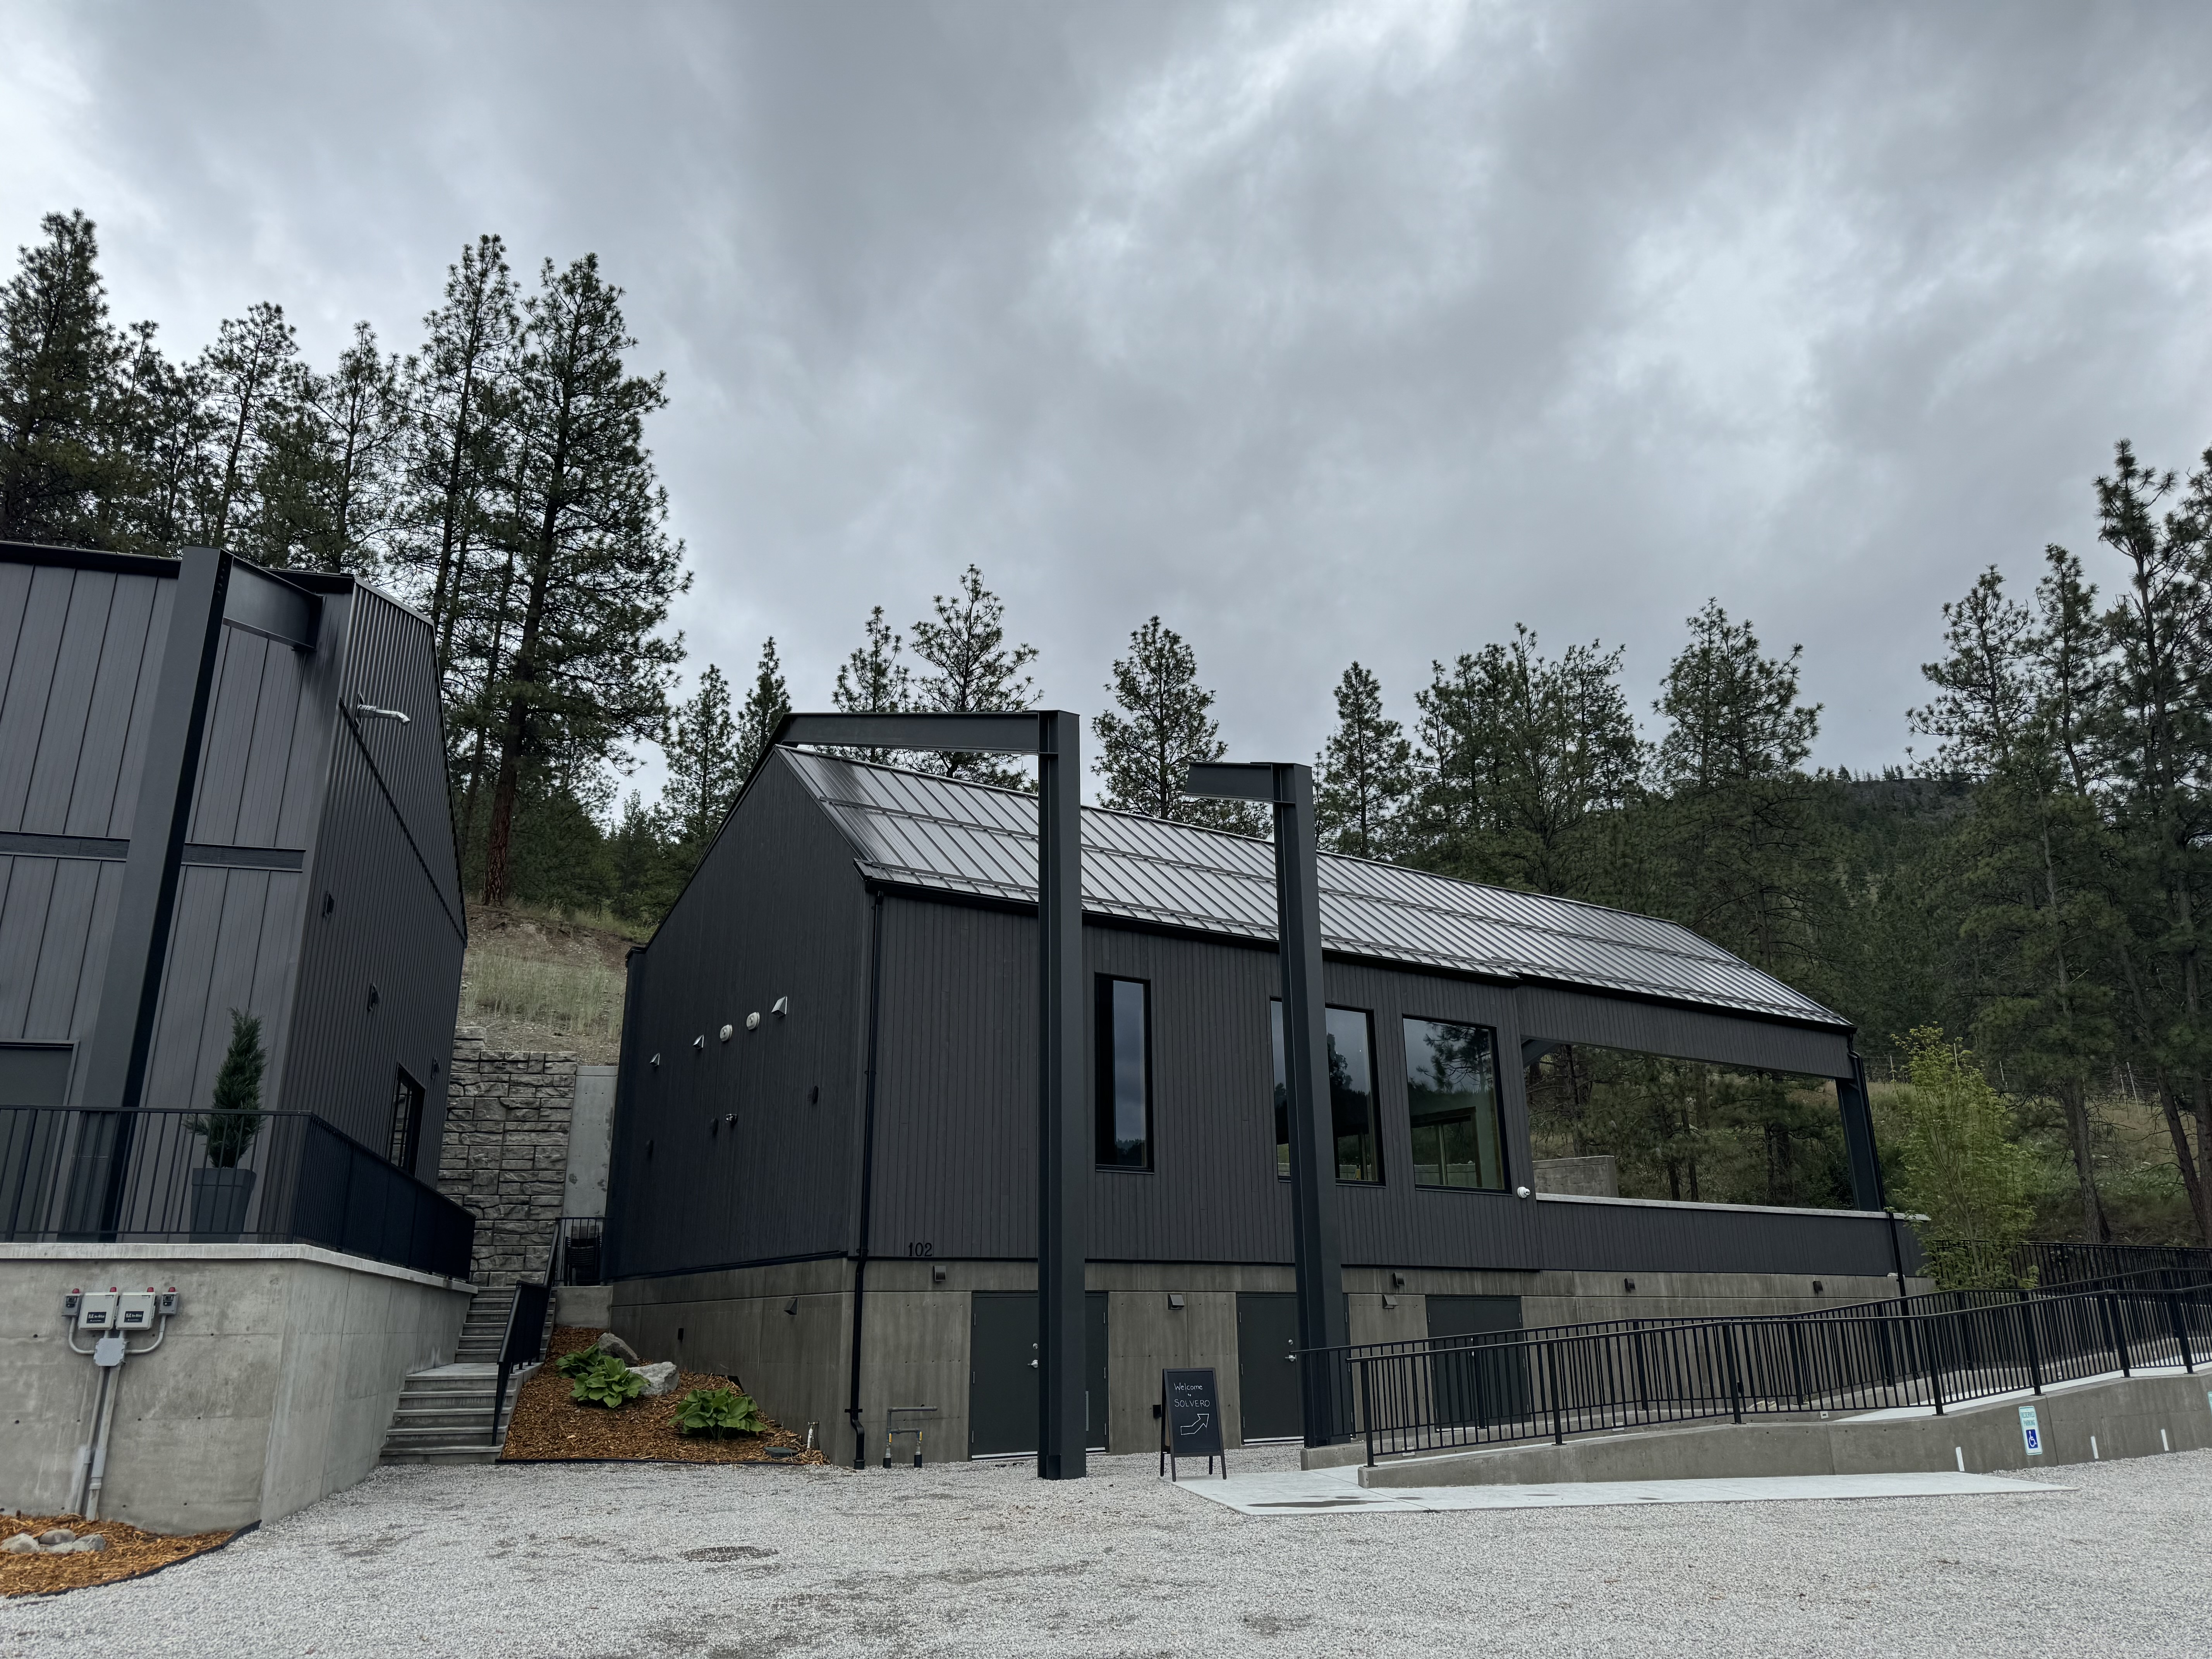 New winery and tasting room set to open in Summerland, B.C.